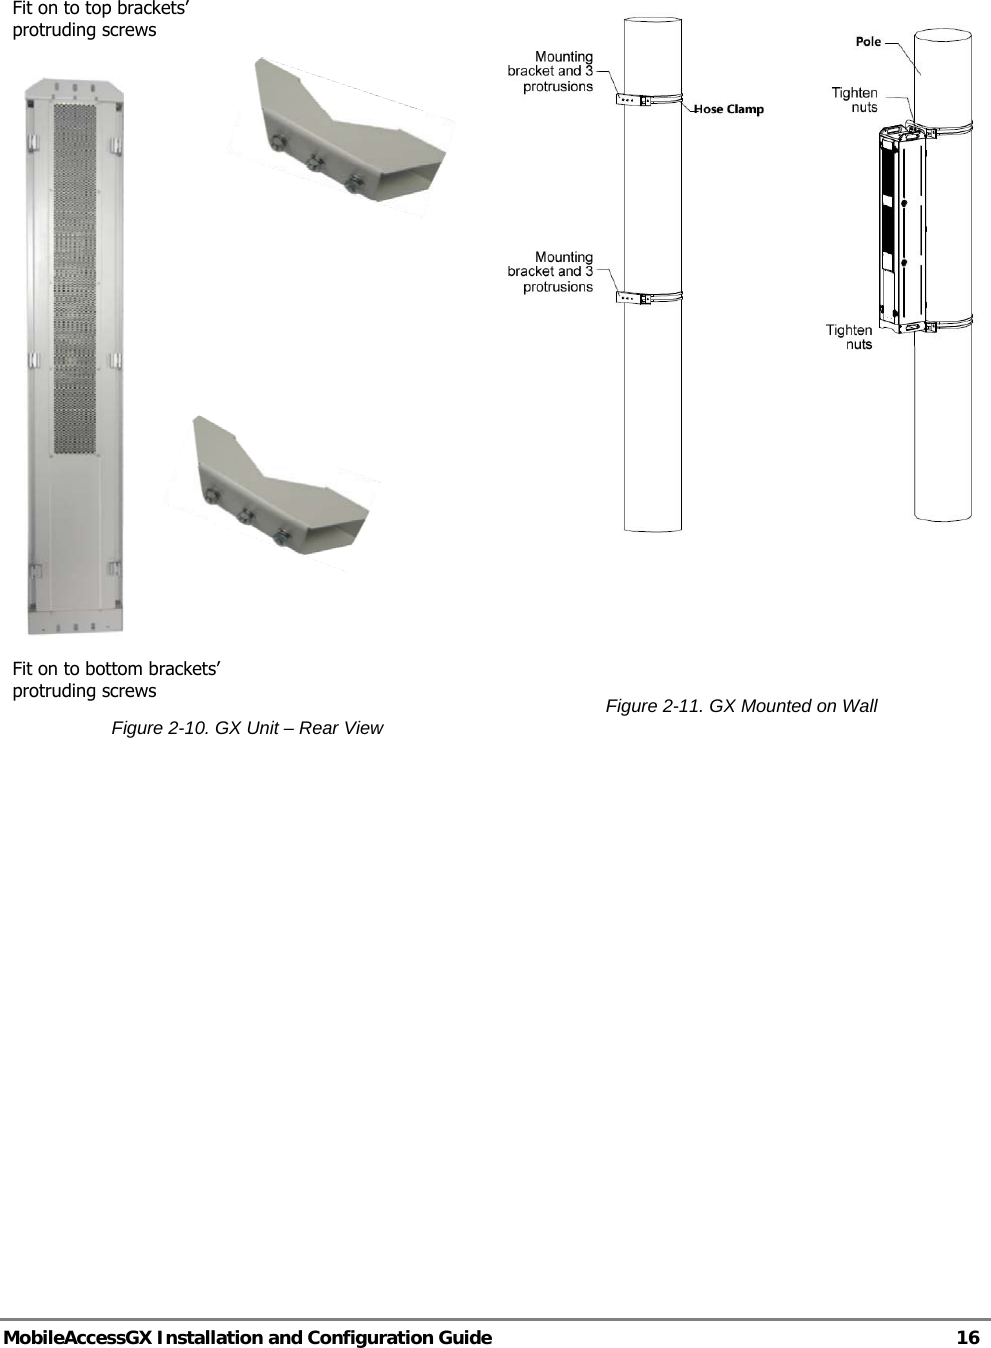   MobileAccessGX Installation and Configuration Guide   16       Figure 2-10. GX Unit – Rear View     Figure 2-11. GX Mounted on Wall       Fit on to top brackets’ protruding screws Fit on to bottom brackets’ protruding screws 